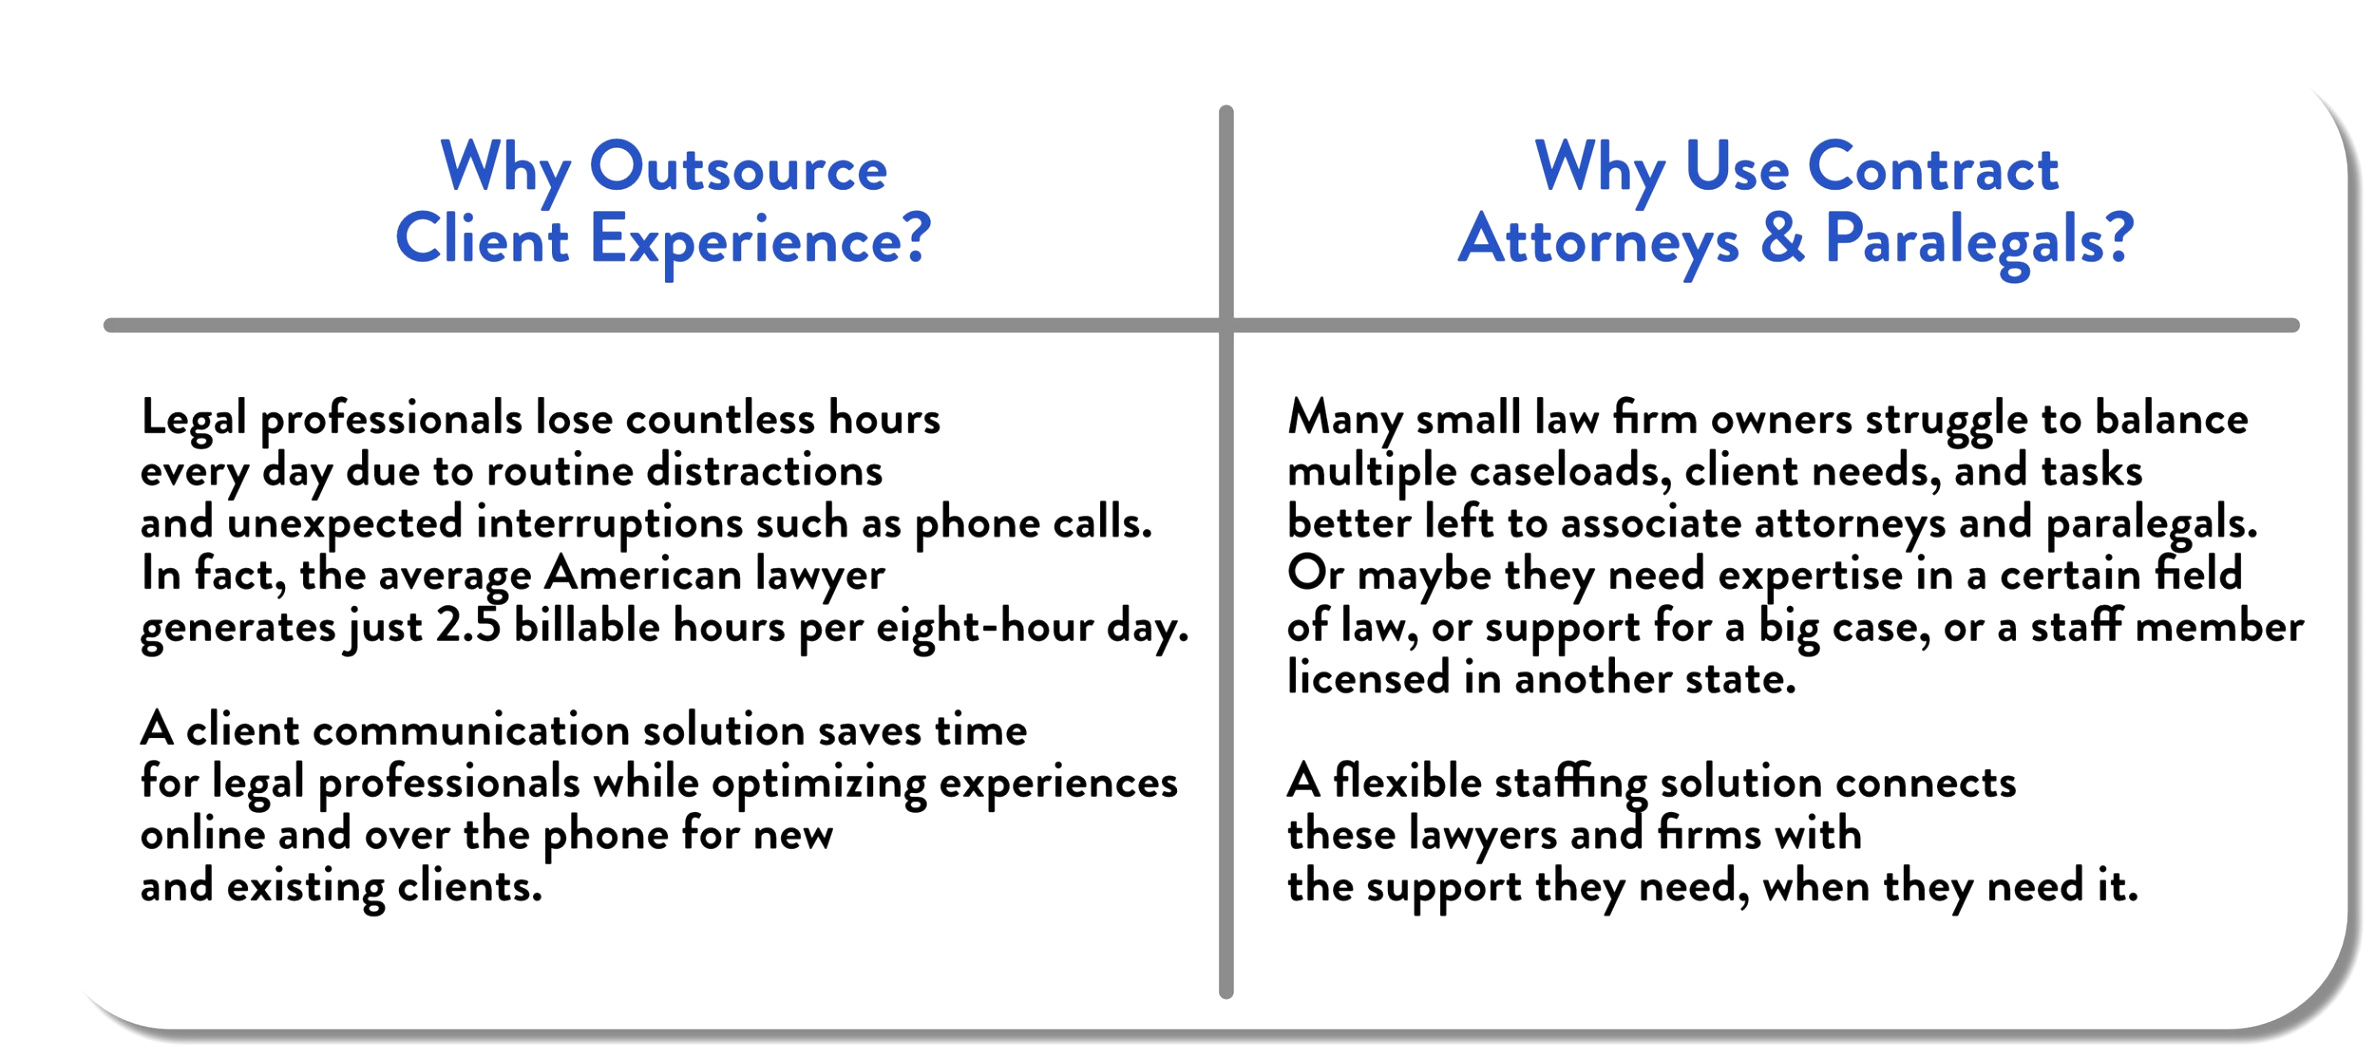 definitive guide to legal outsourcing